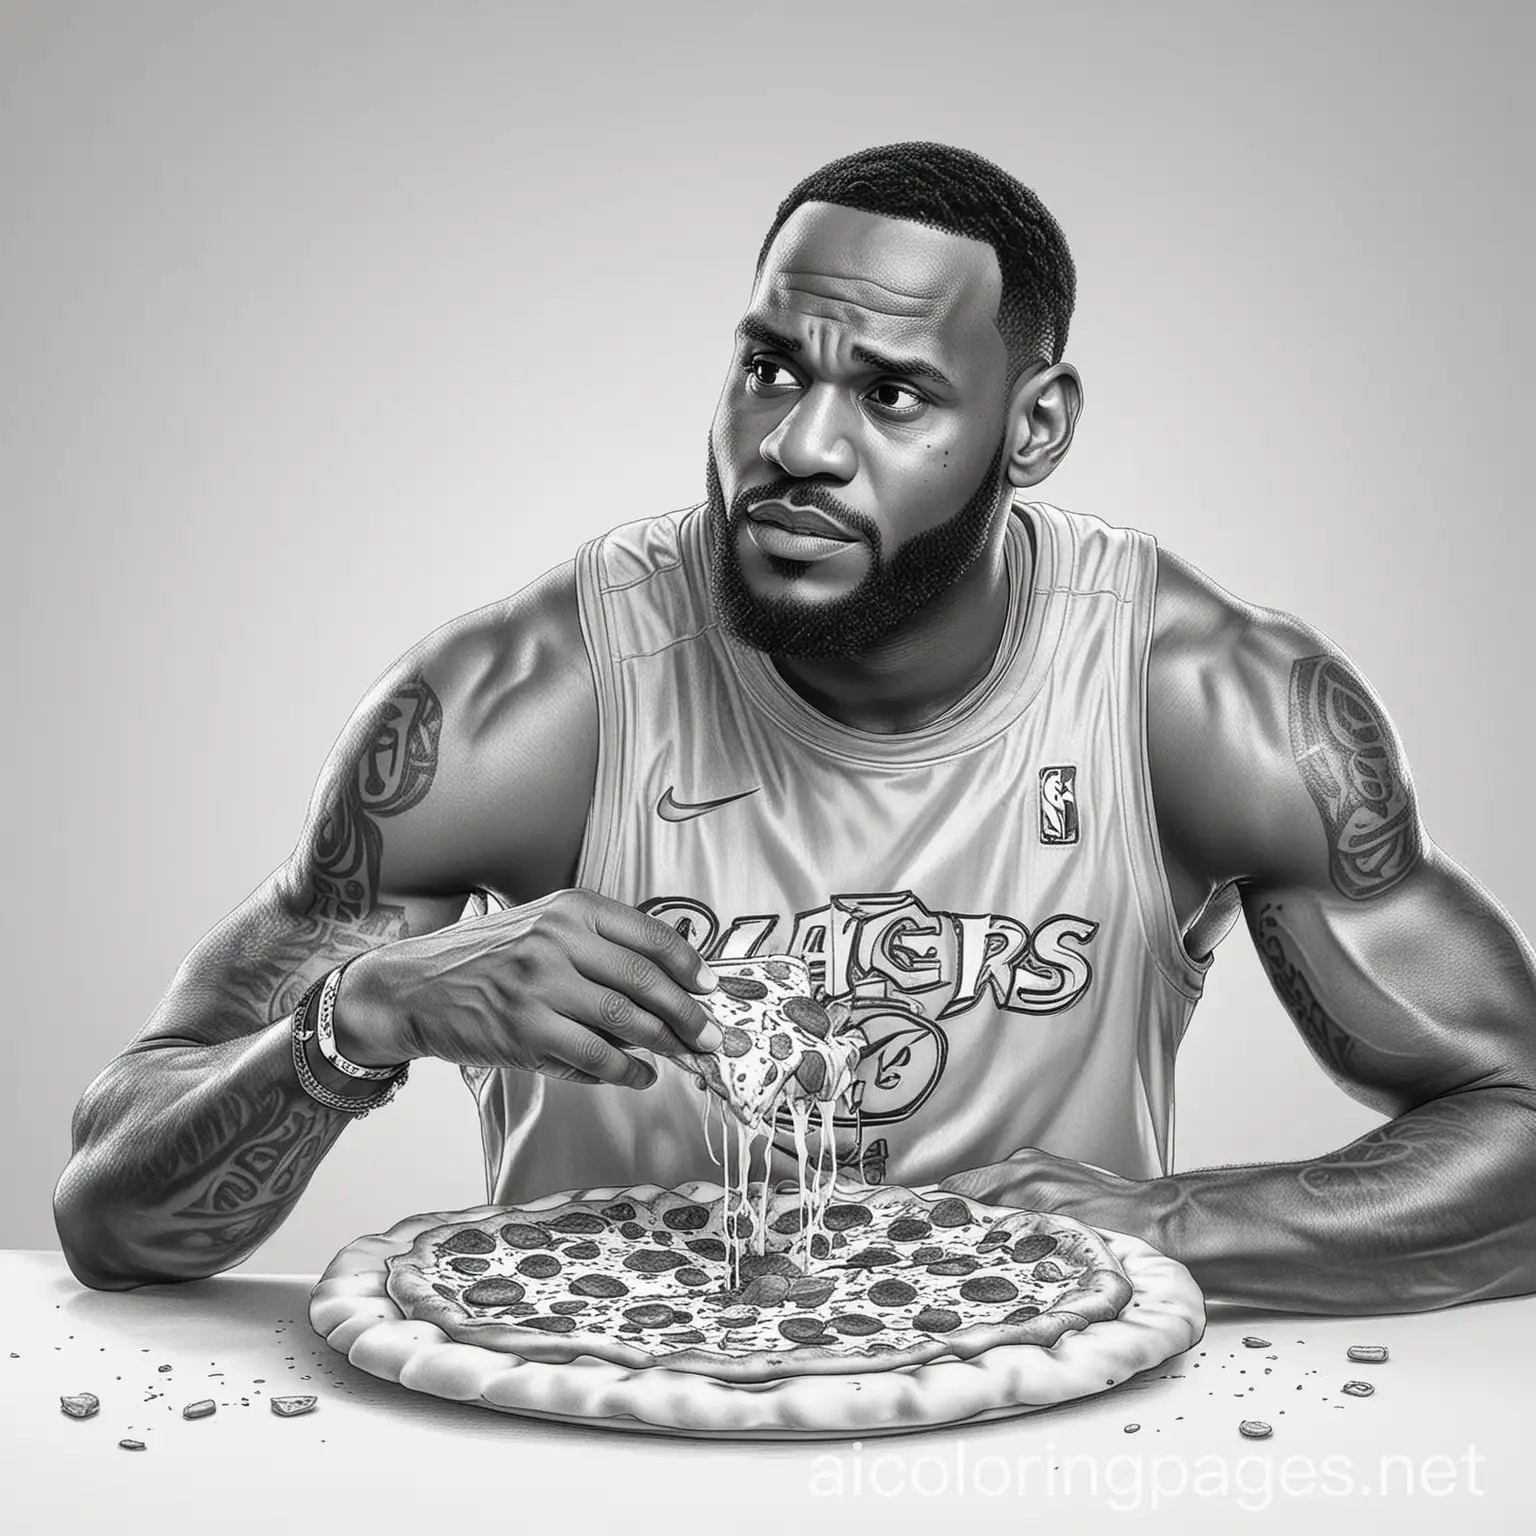 Lebron James  eating pizza with S. Curry , Coloring Page, black and white, line art, white background, Simplicity, Ample White Space. The background of the coloring page is plain white to make it easy for young children to color within the lines. The outlines of all the subjects are easy to distinguish, making it simple for kids to color without too much difficulty